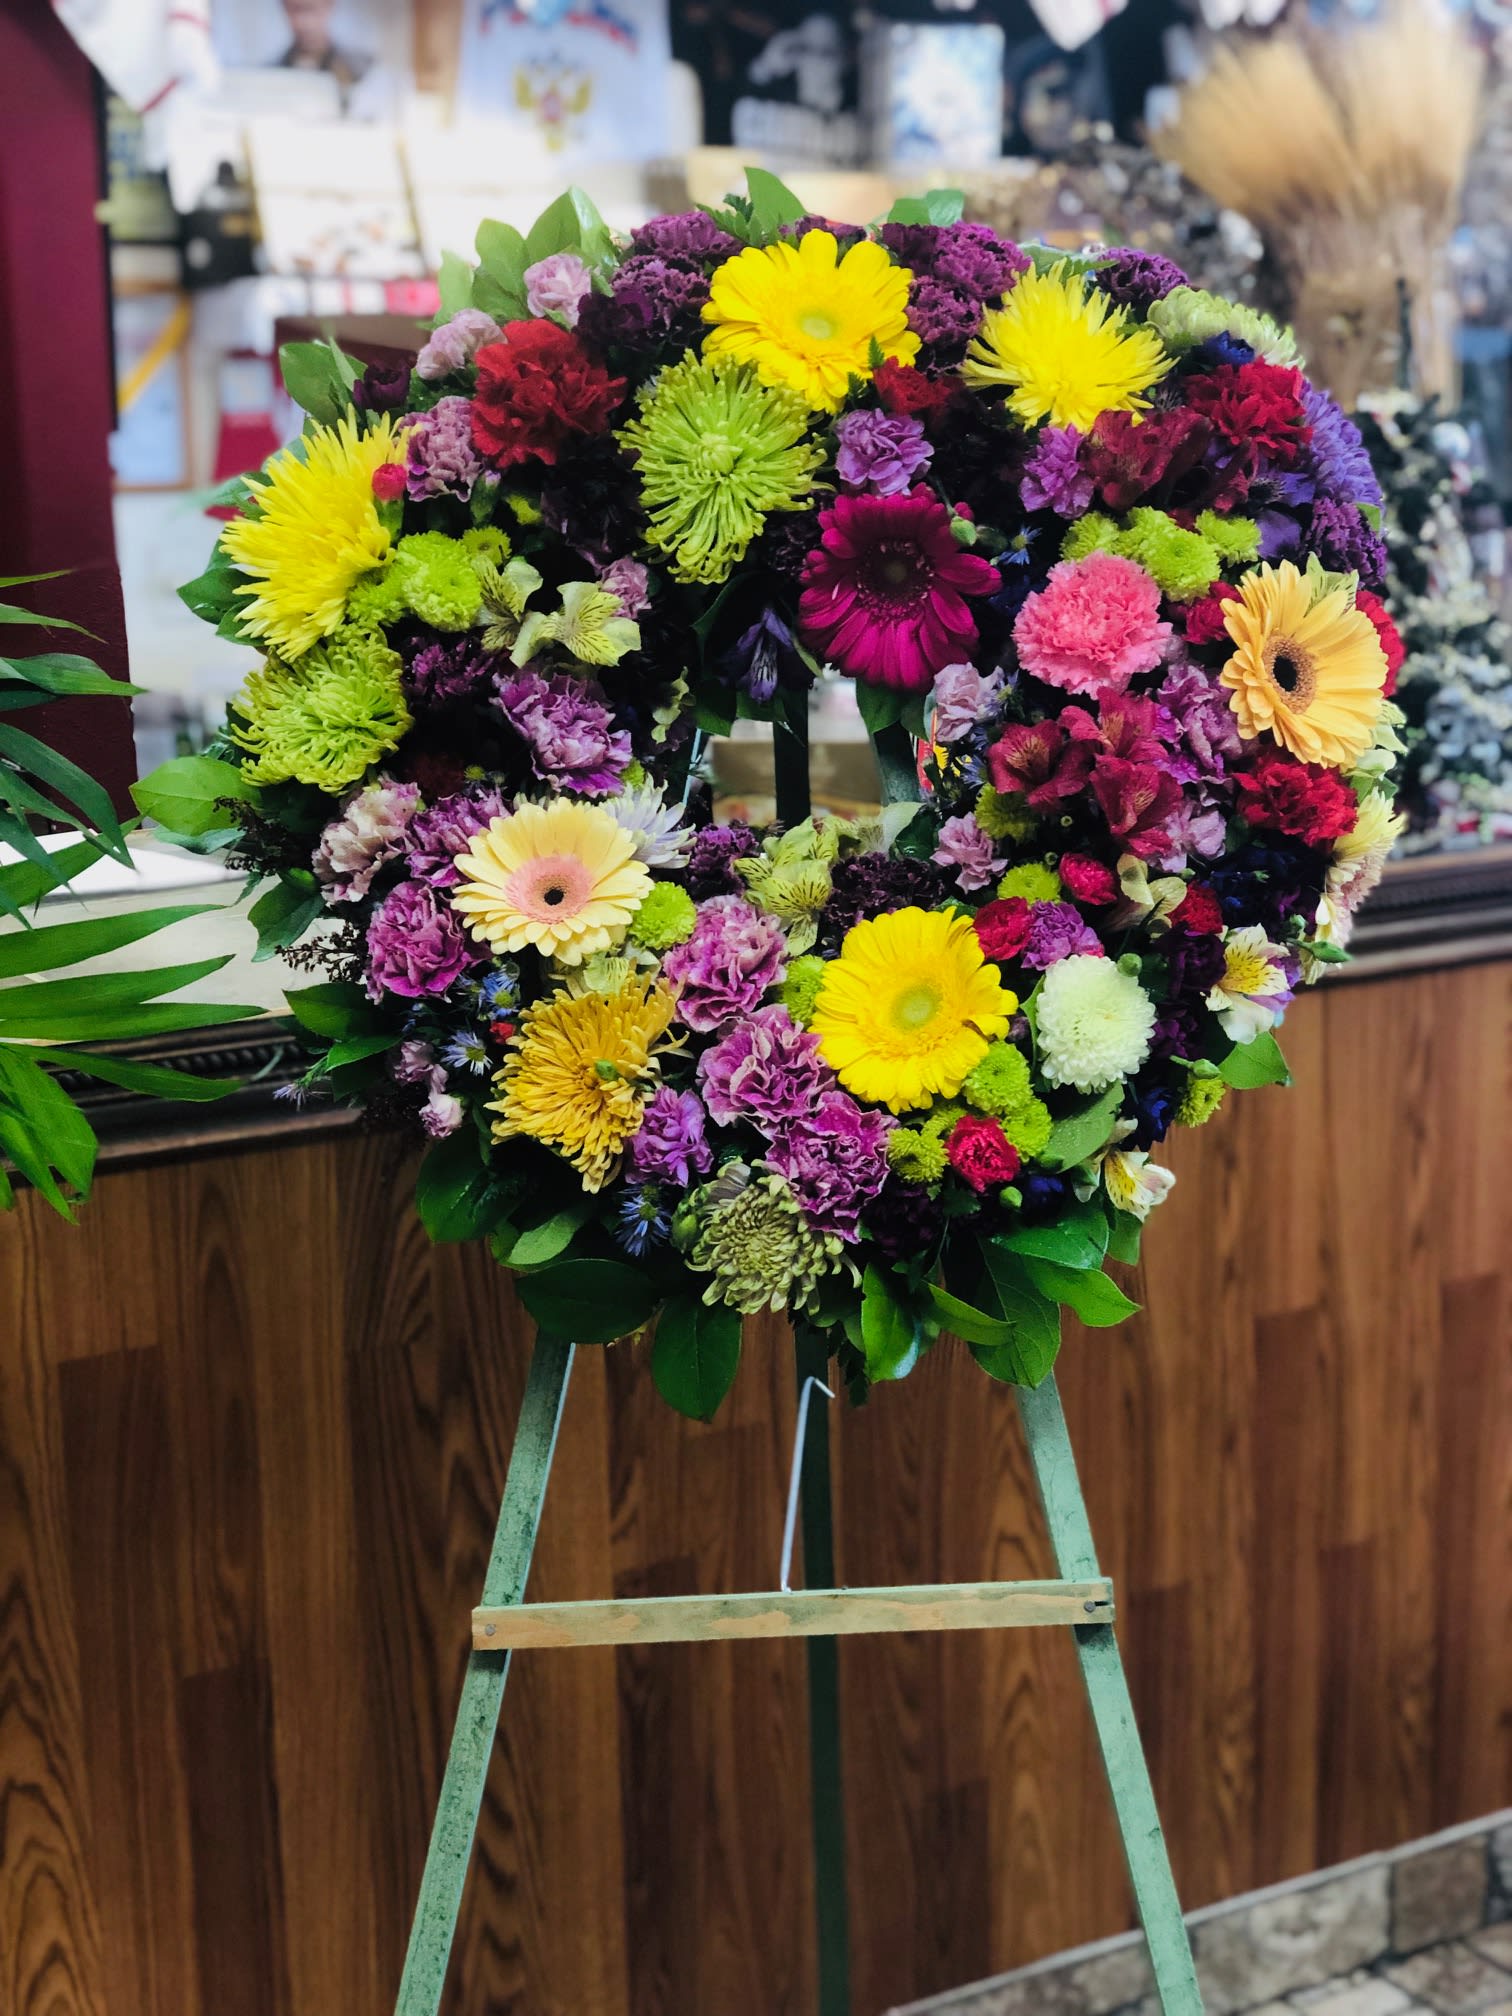 Summer Heart - Bright and colorful heart for beautiful way to express the impact that the departed had on your life. Multiple colors and flowers including gerbera daisies, chrysanthemums, carnations and alstromeria.